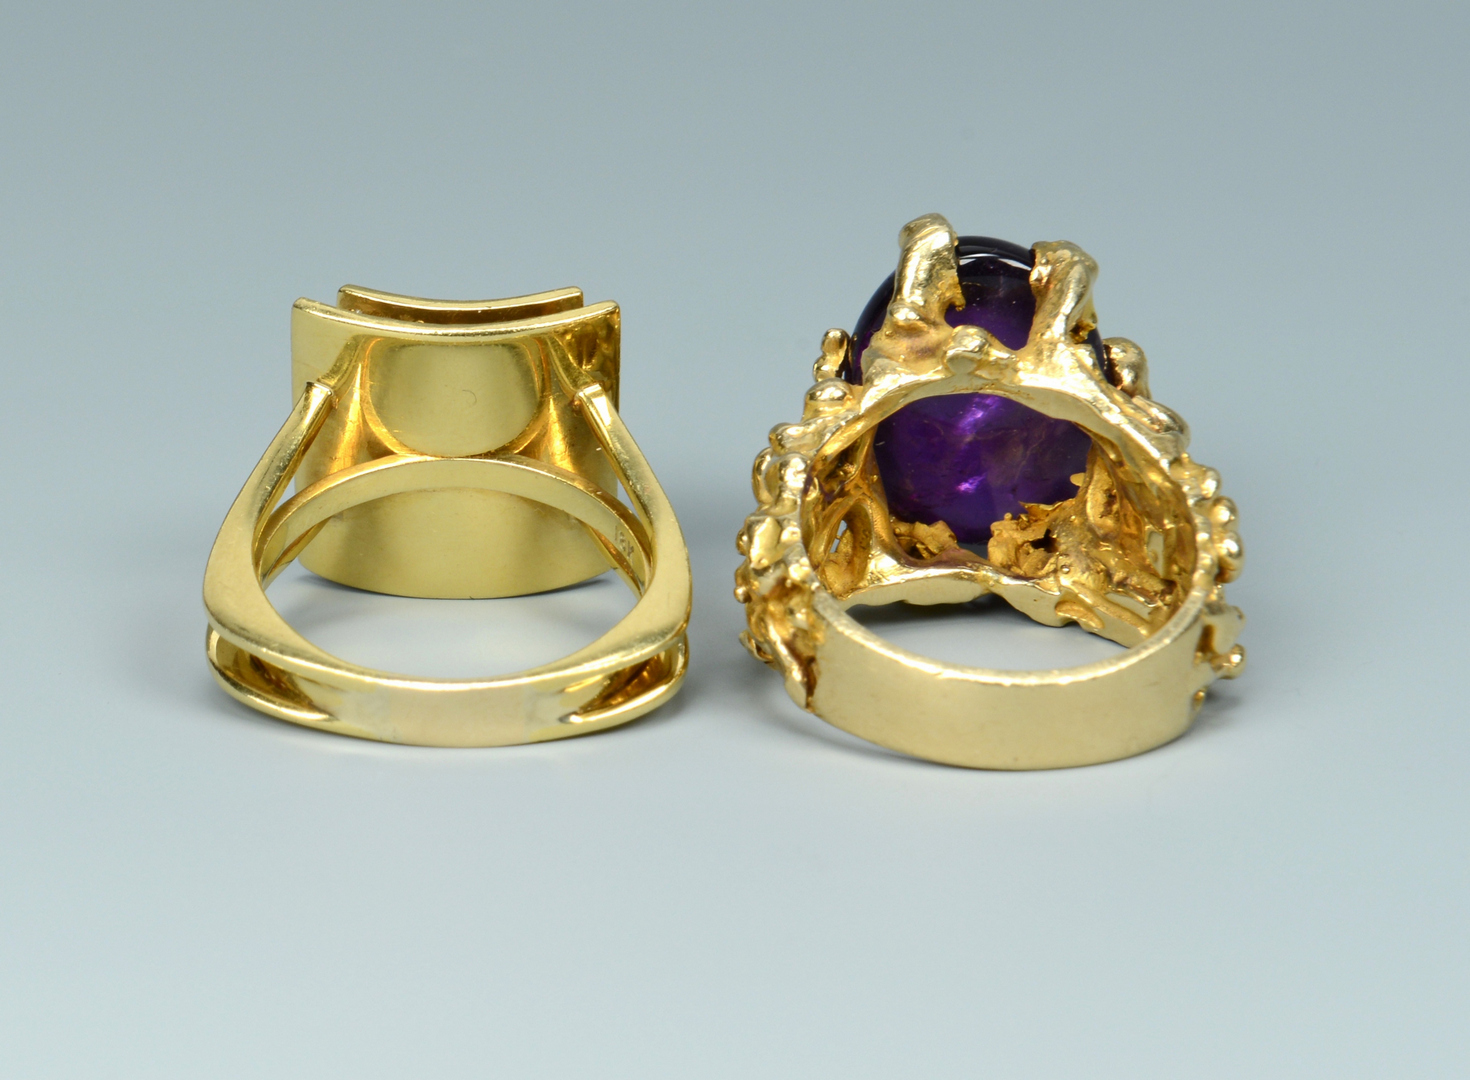 Lot 3088232: Two 14K Colored Stone Rings